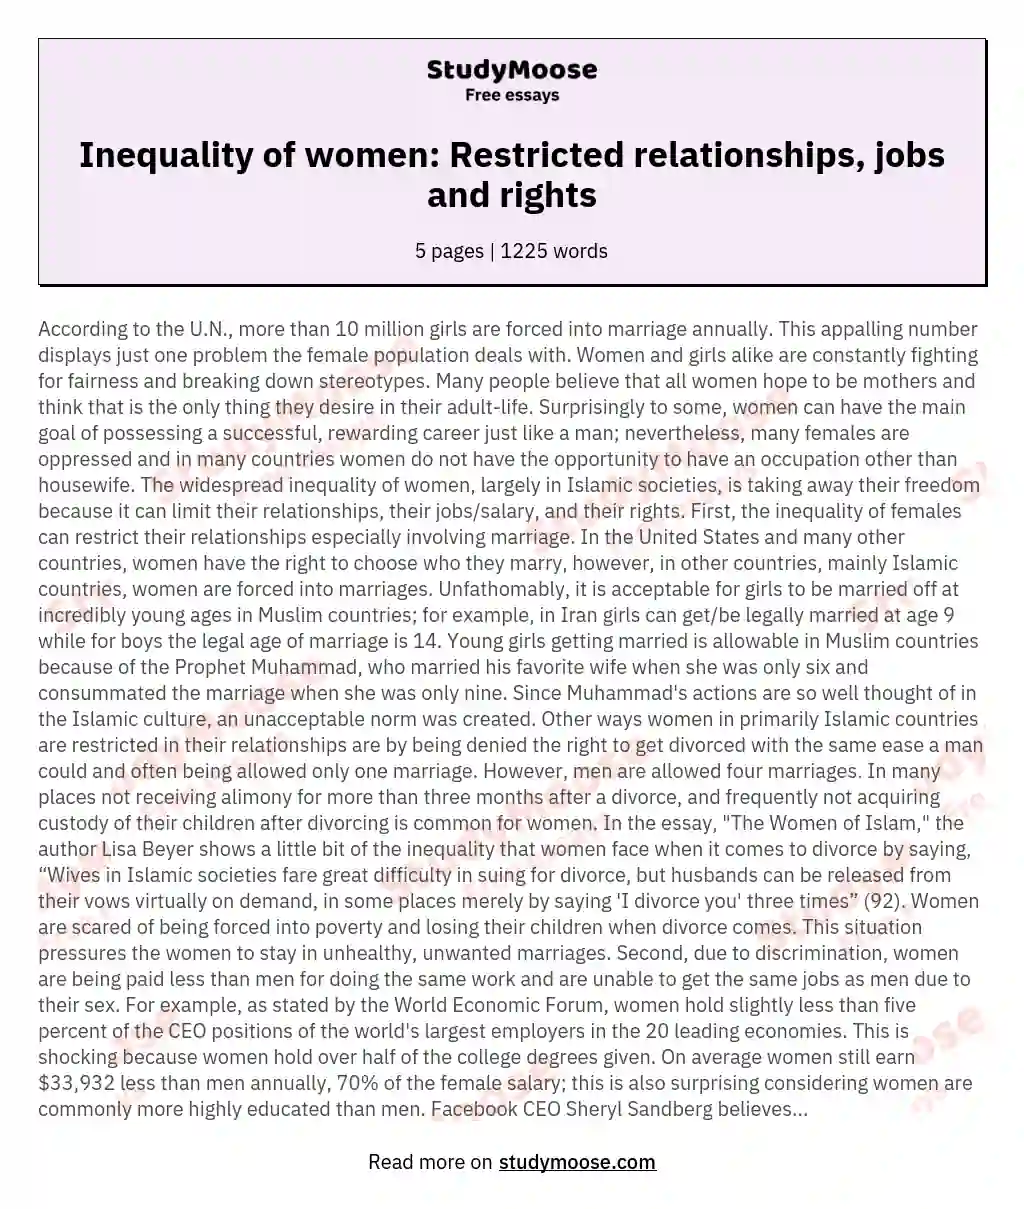 Inequality of women: Restricted relationships, jobs and rights